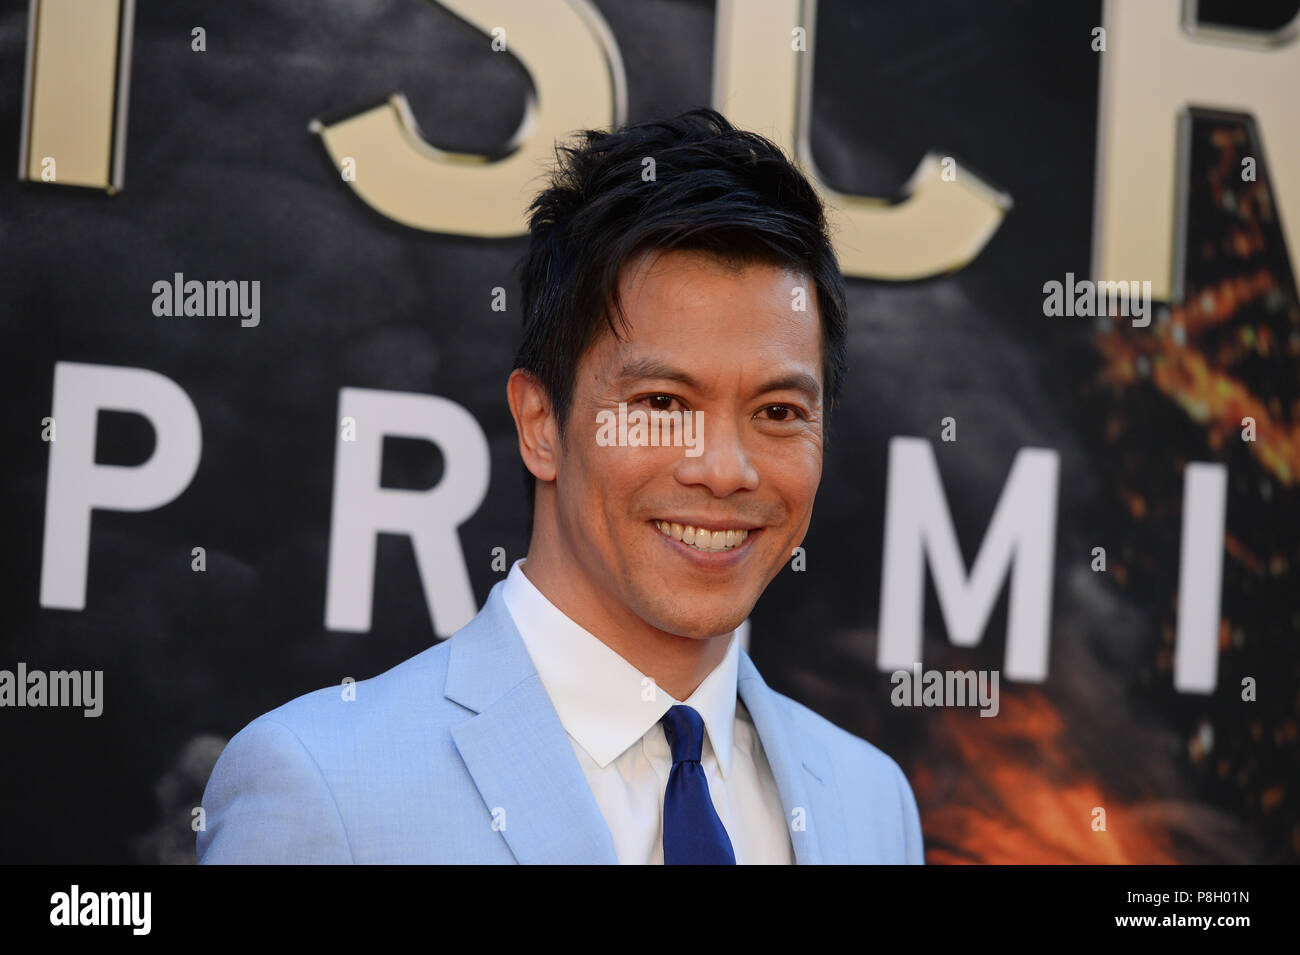 New York, USA. 10th July 2018. Byron Mann attends the 'Skyscraper' New York premiere at AMC Loews Lincoln Square on July 10, 2018 in New York City. Credit: Erik Pendzich/Alamy Live News Stock Photo